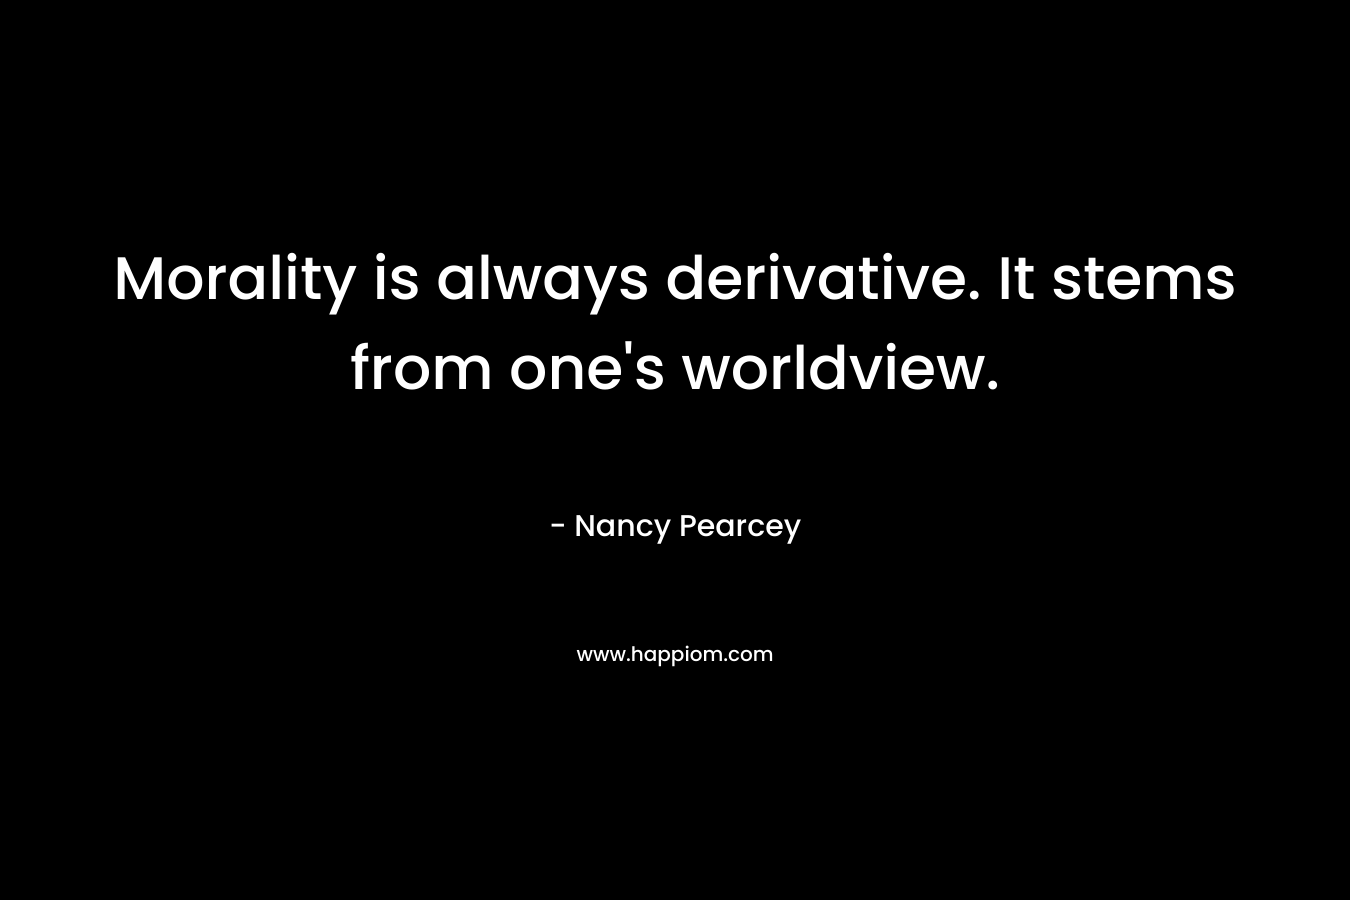 Morality is always derivative. It stems from one's worldview.